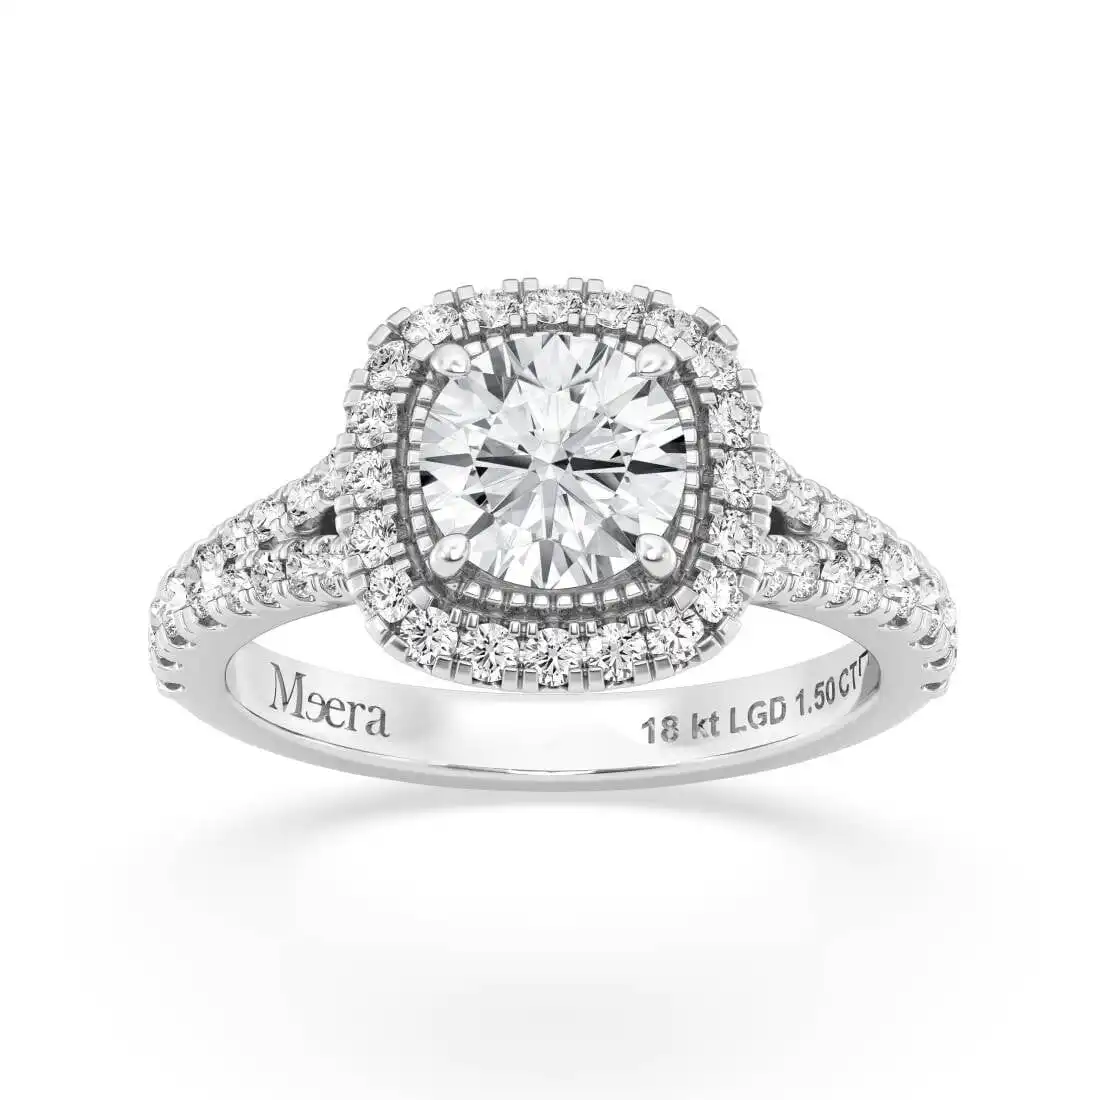 Meera Halo Ring with 1.50ct of Laboratory Grown Diamonds in 18ct White Gold